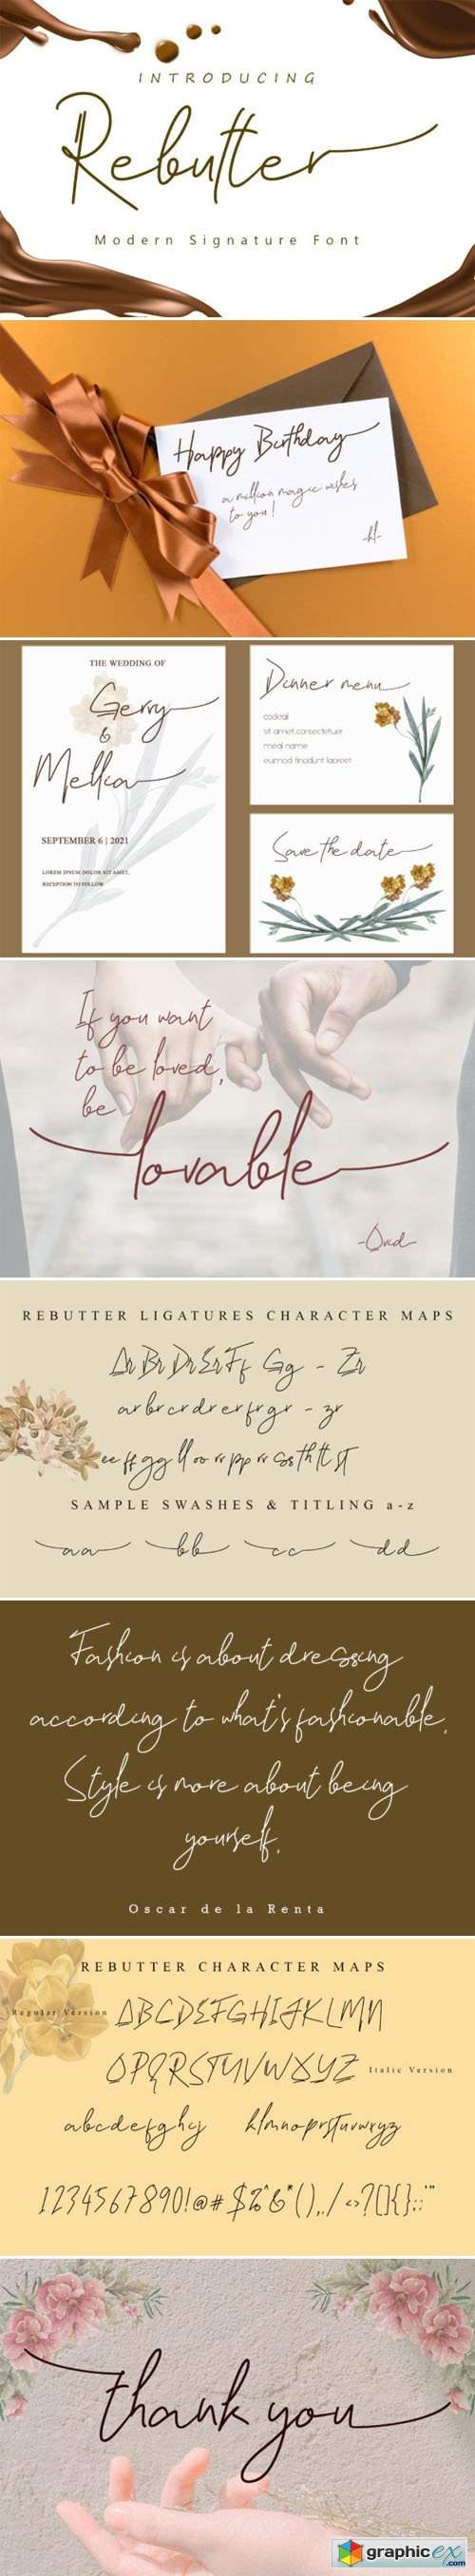  Rebutter - Fashionable Signature Font [2-Weights] 